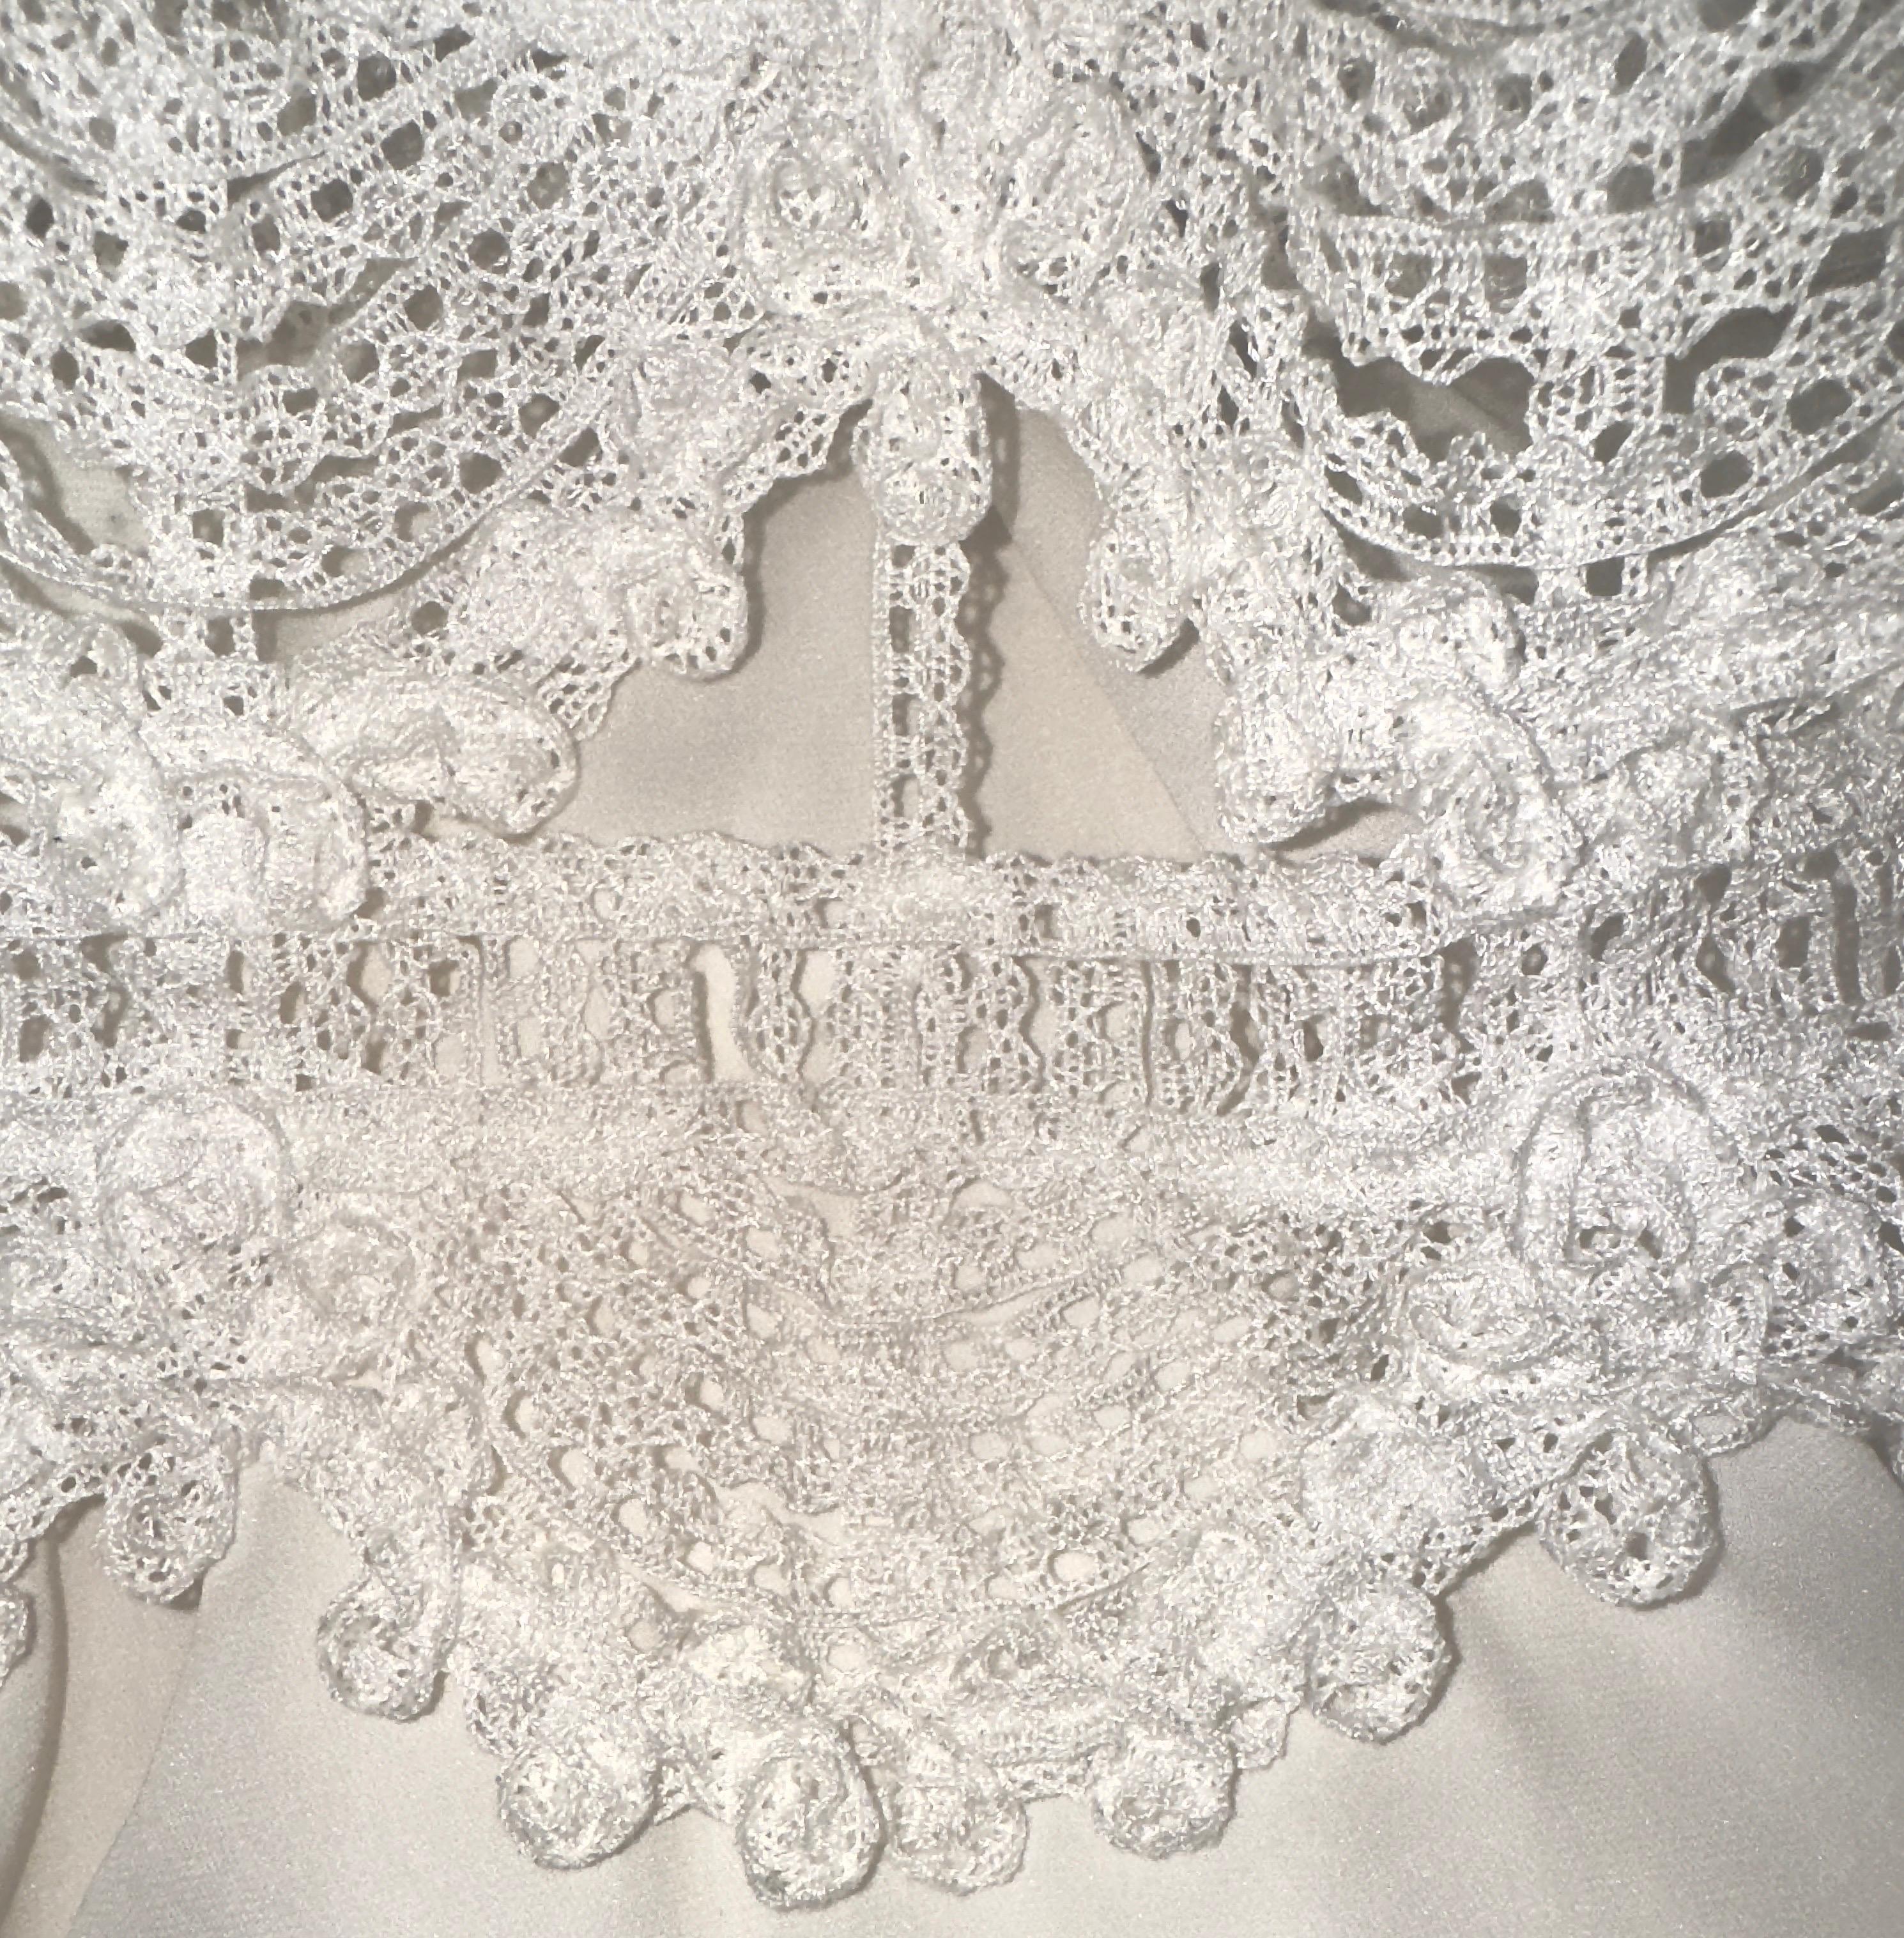 DOLCE & GABBANA Strapless Corset Bustier Lace Engagement Bridal Dress 38 In Good Condition For Sale In Switzerland, CH